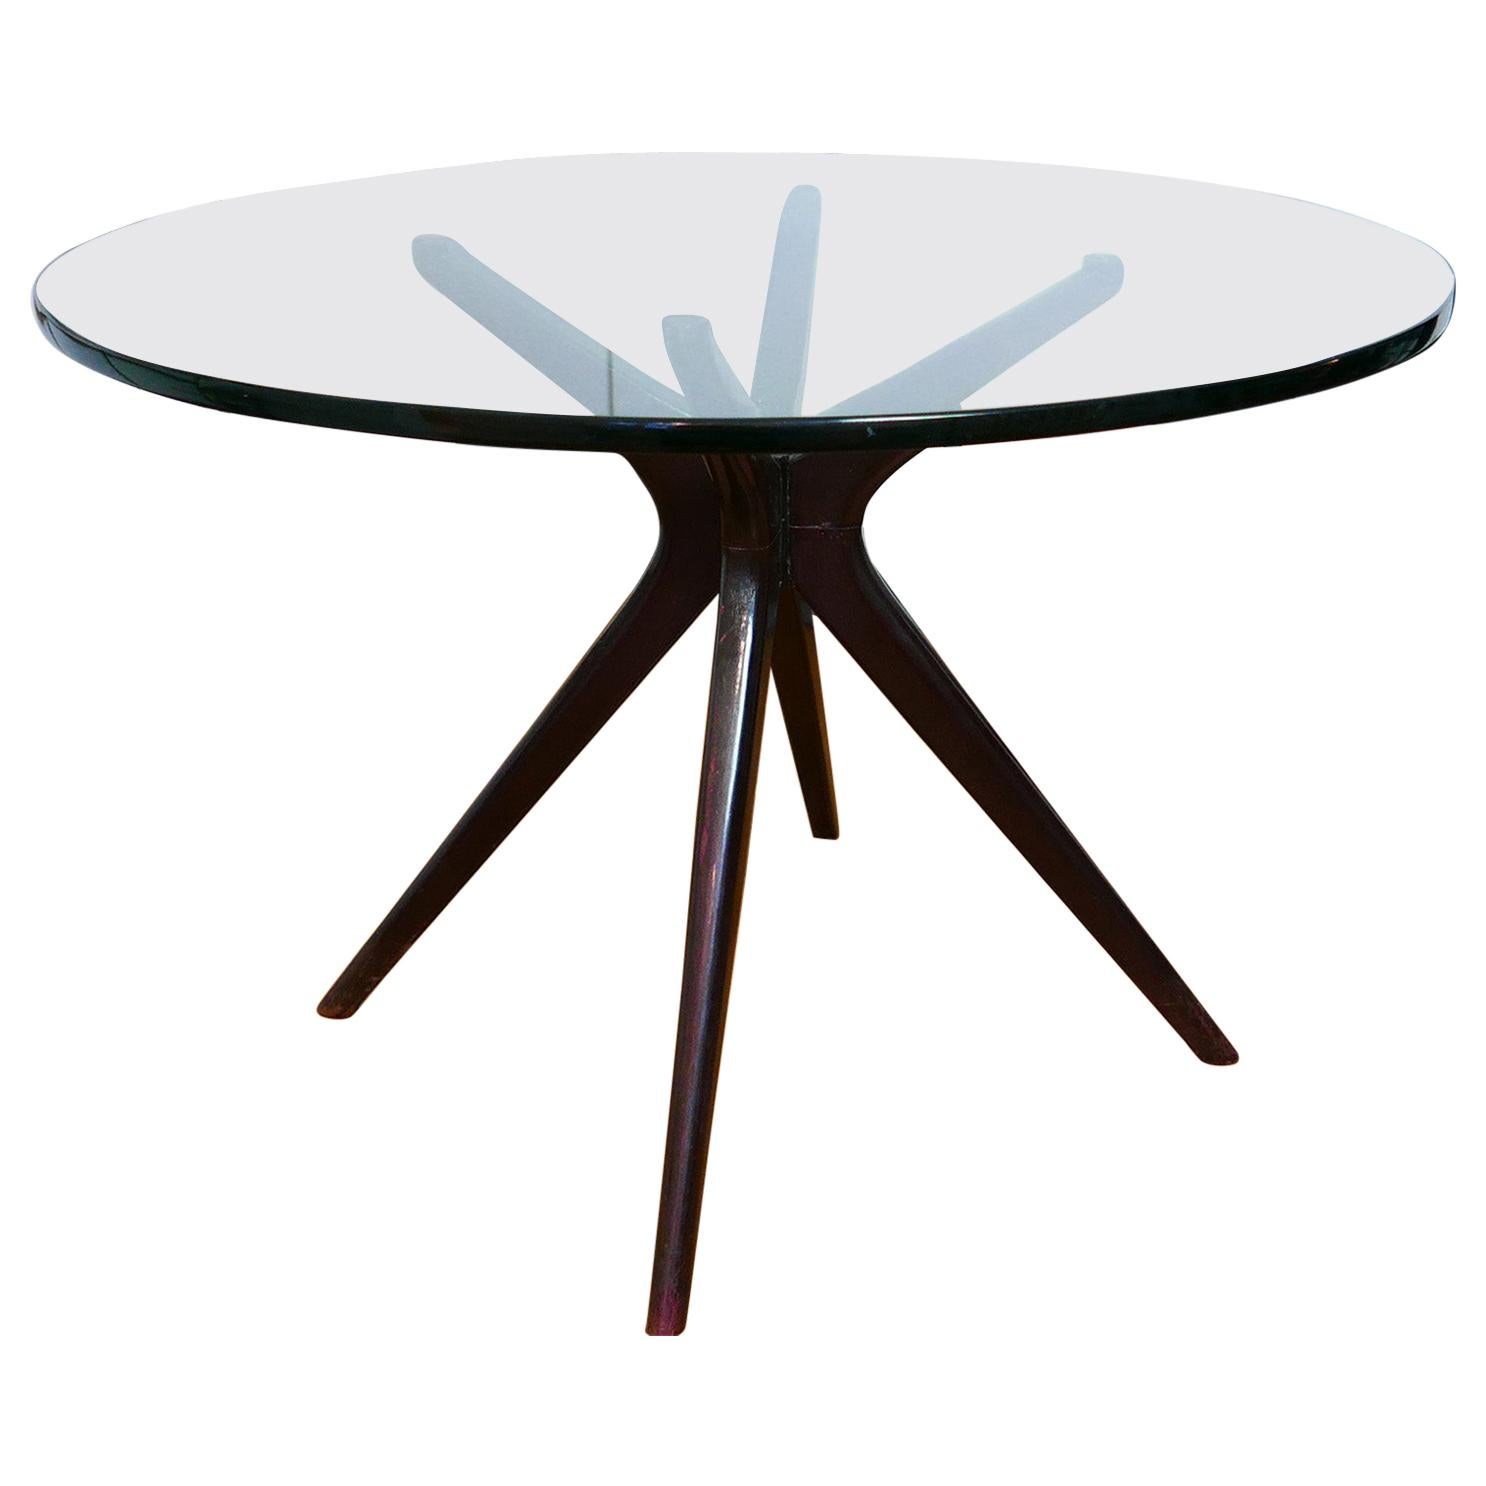 Mid-Century Modern Italian Round Wood Table with Thick Glass Top, Milano, 1950s For Sale